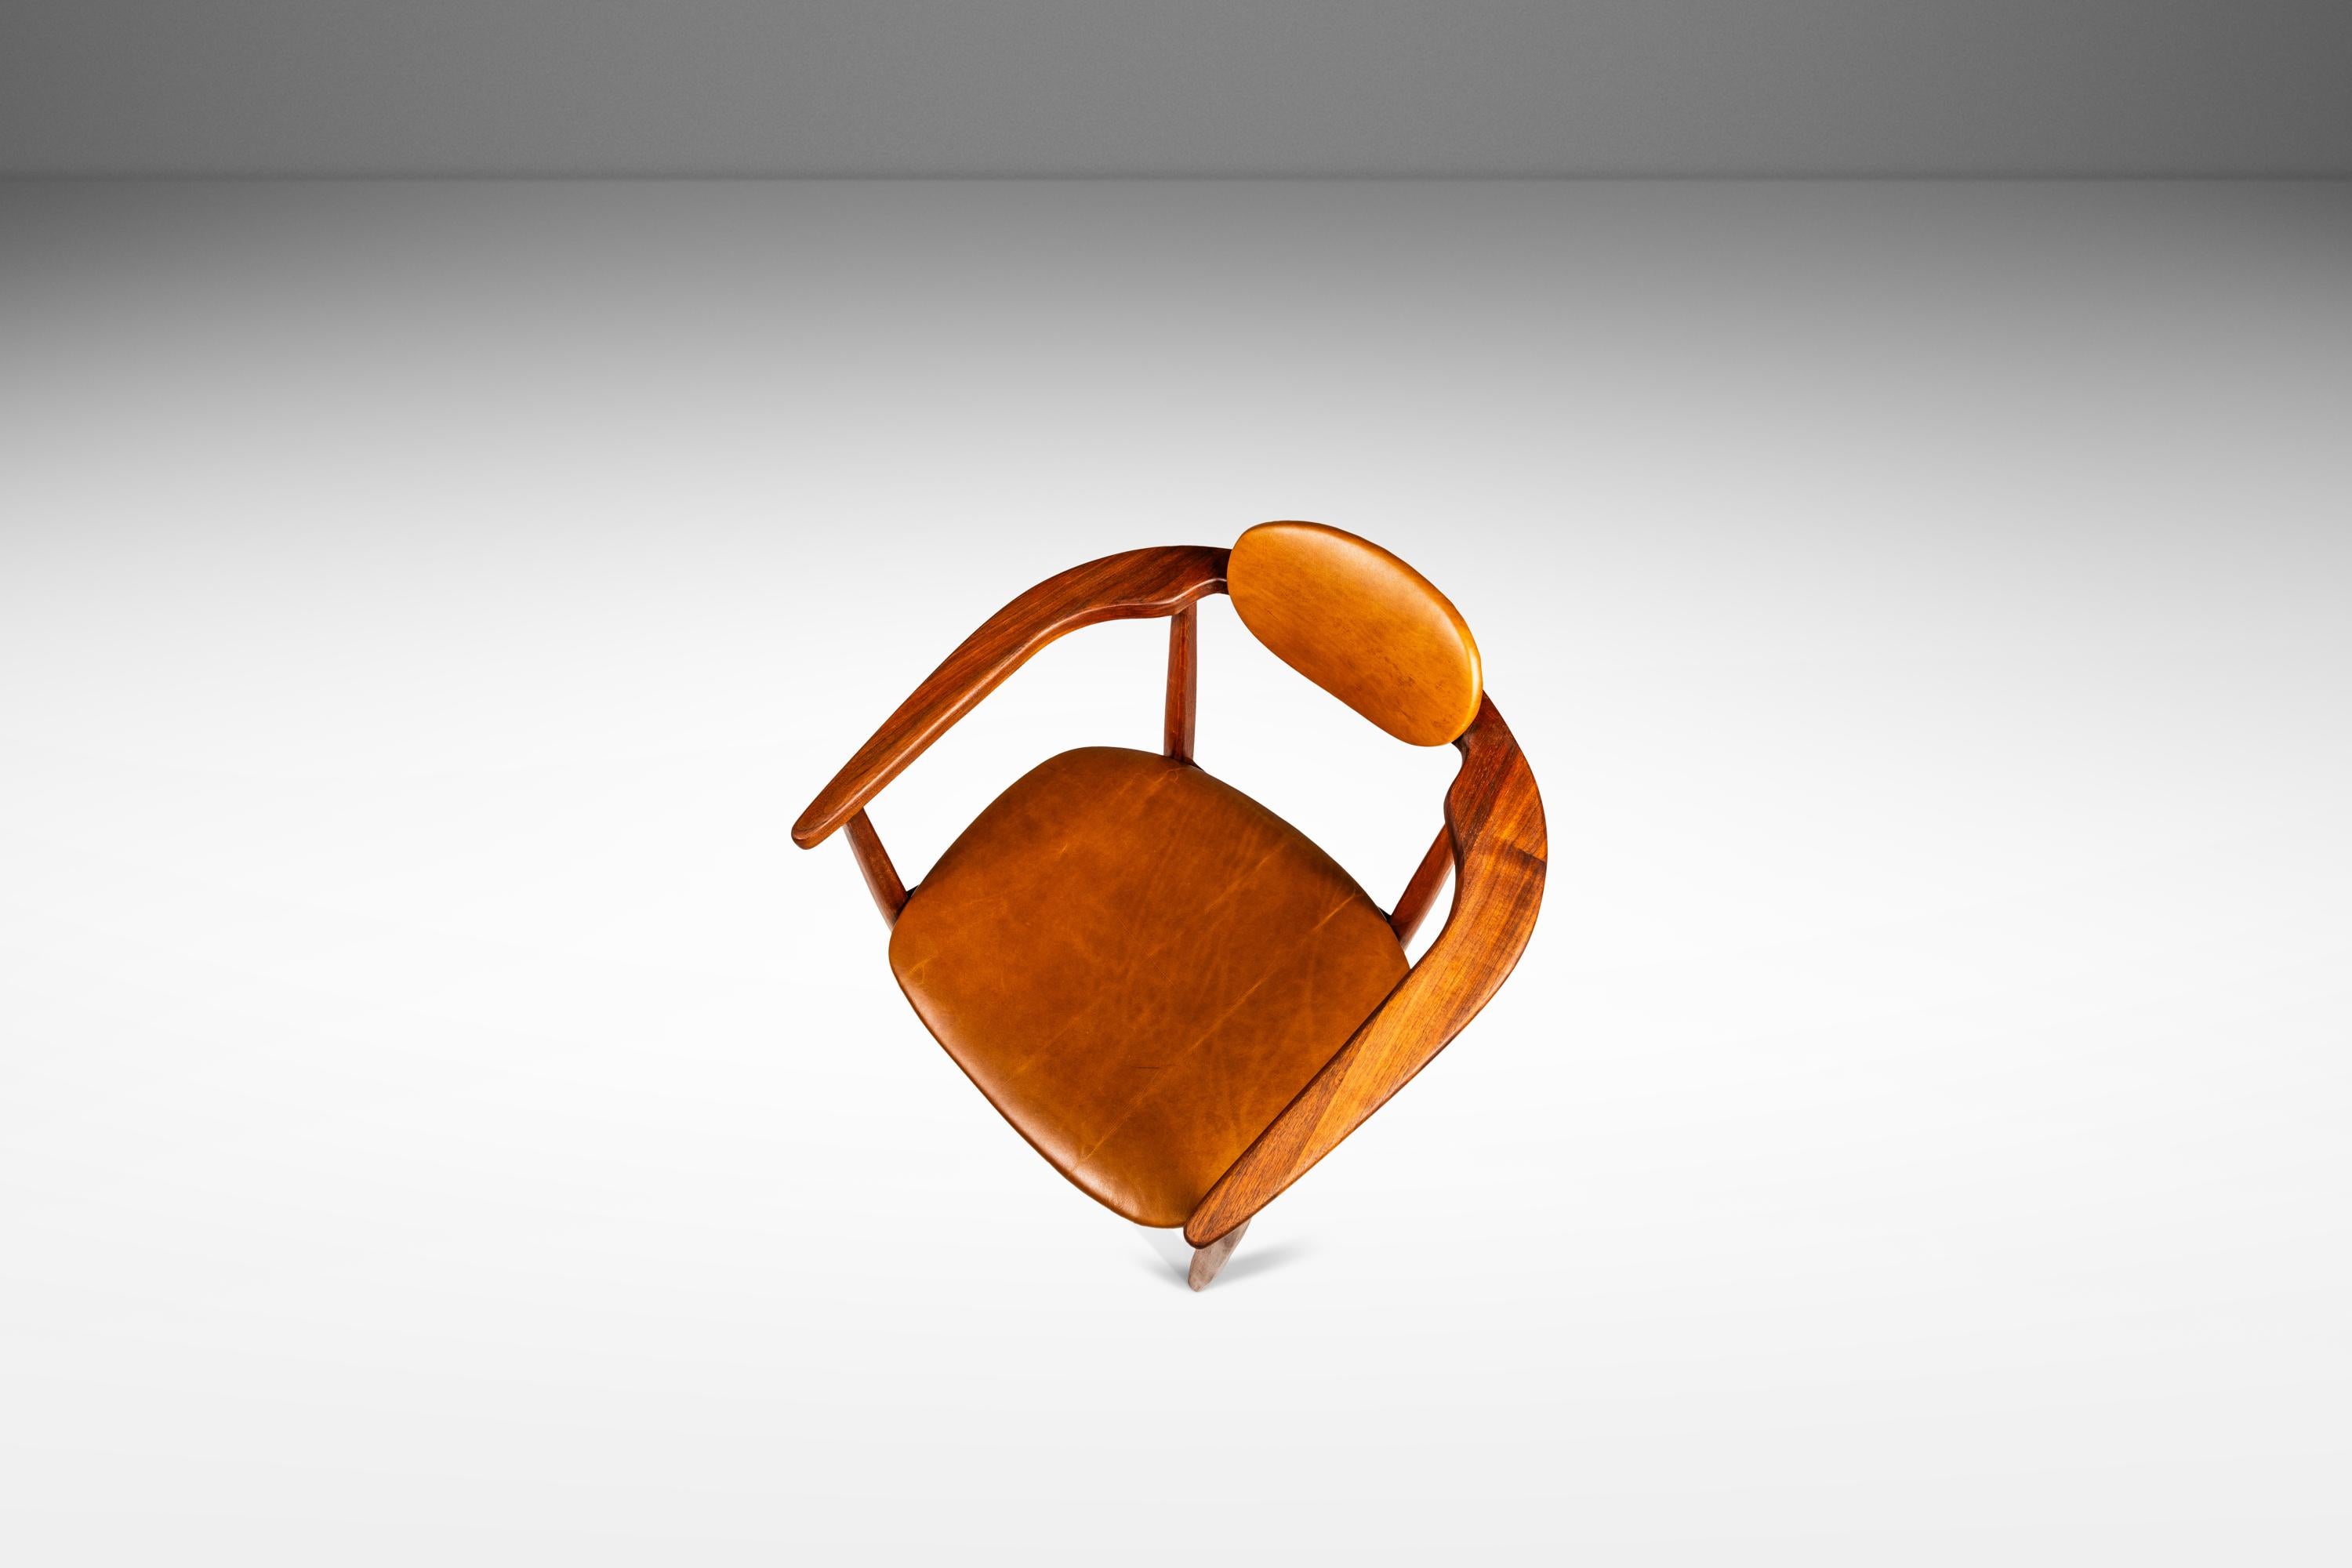 Set of 2 Sculptural Lounge Chairs, Leather & Walnut, Adrian Pearsall Style, 1960 For Sale 8